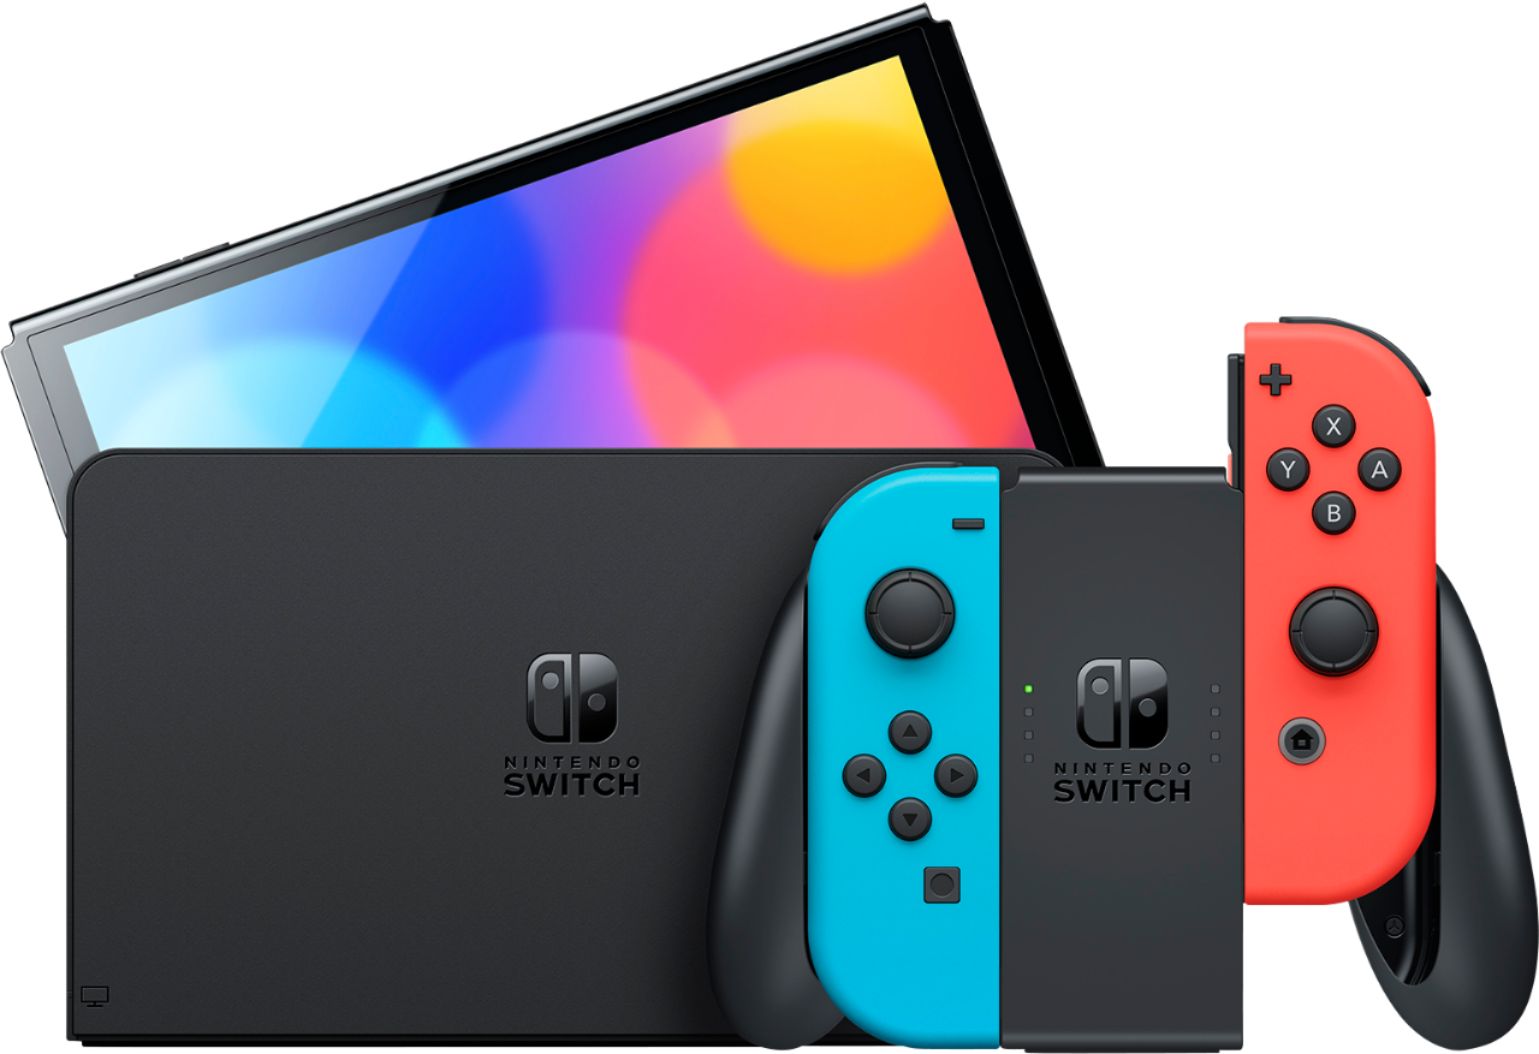 2022 New Nintendo Switch OLED Model Neon Red Blue with Pokemon Shining Pearl and Mytrix Full Body Skin Sticker for NS OLED Console, Dock and Joycons - Sakura Pink